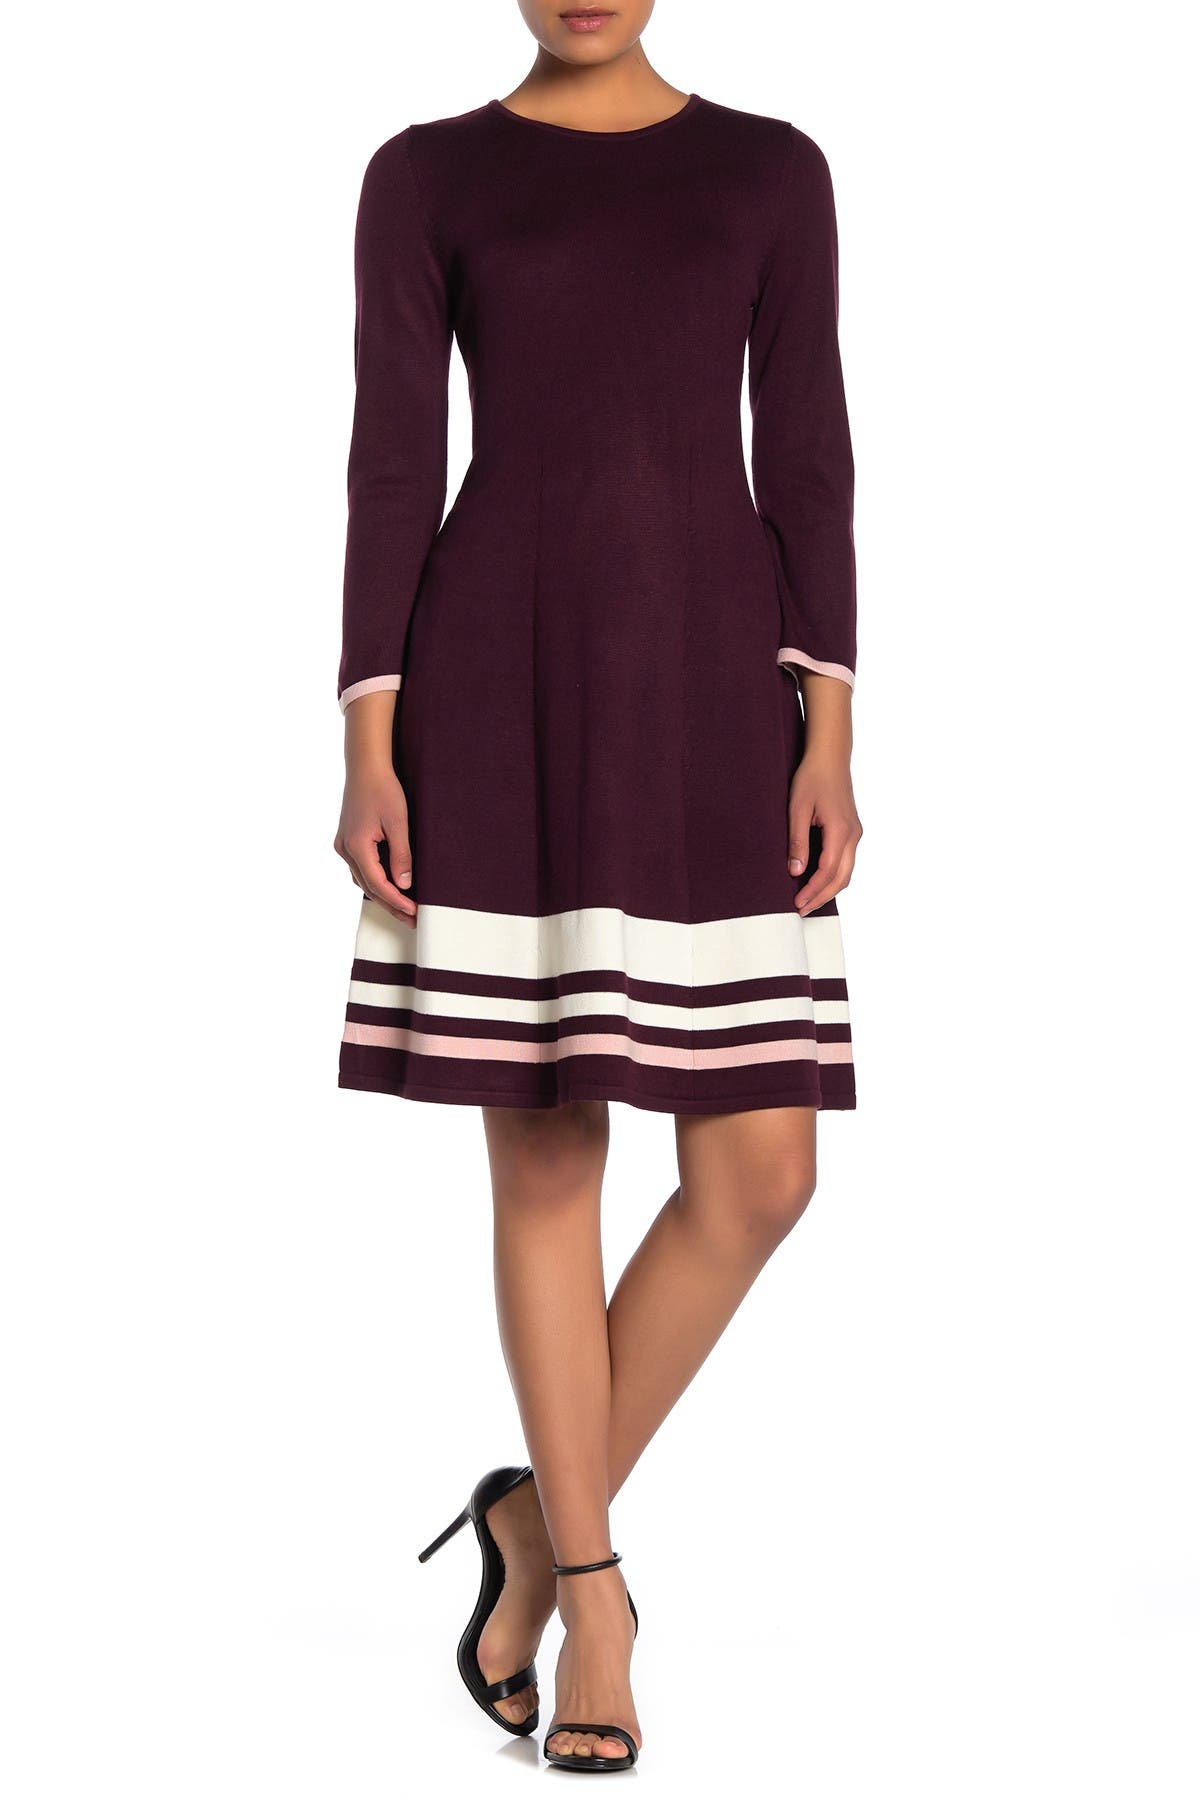 fit and flare dress nordstrom rack